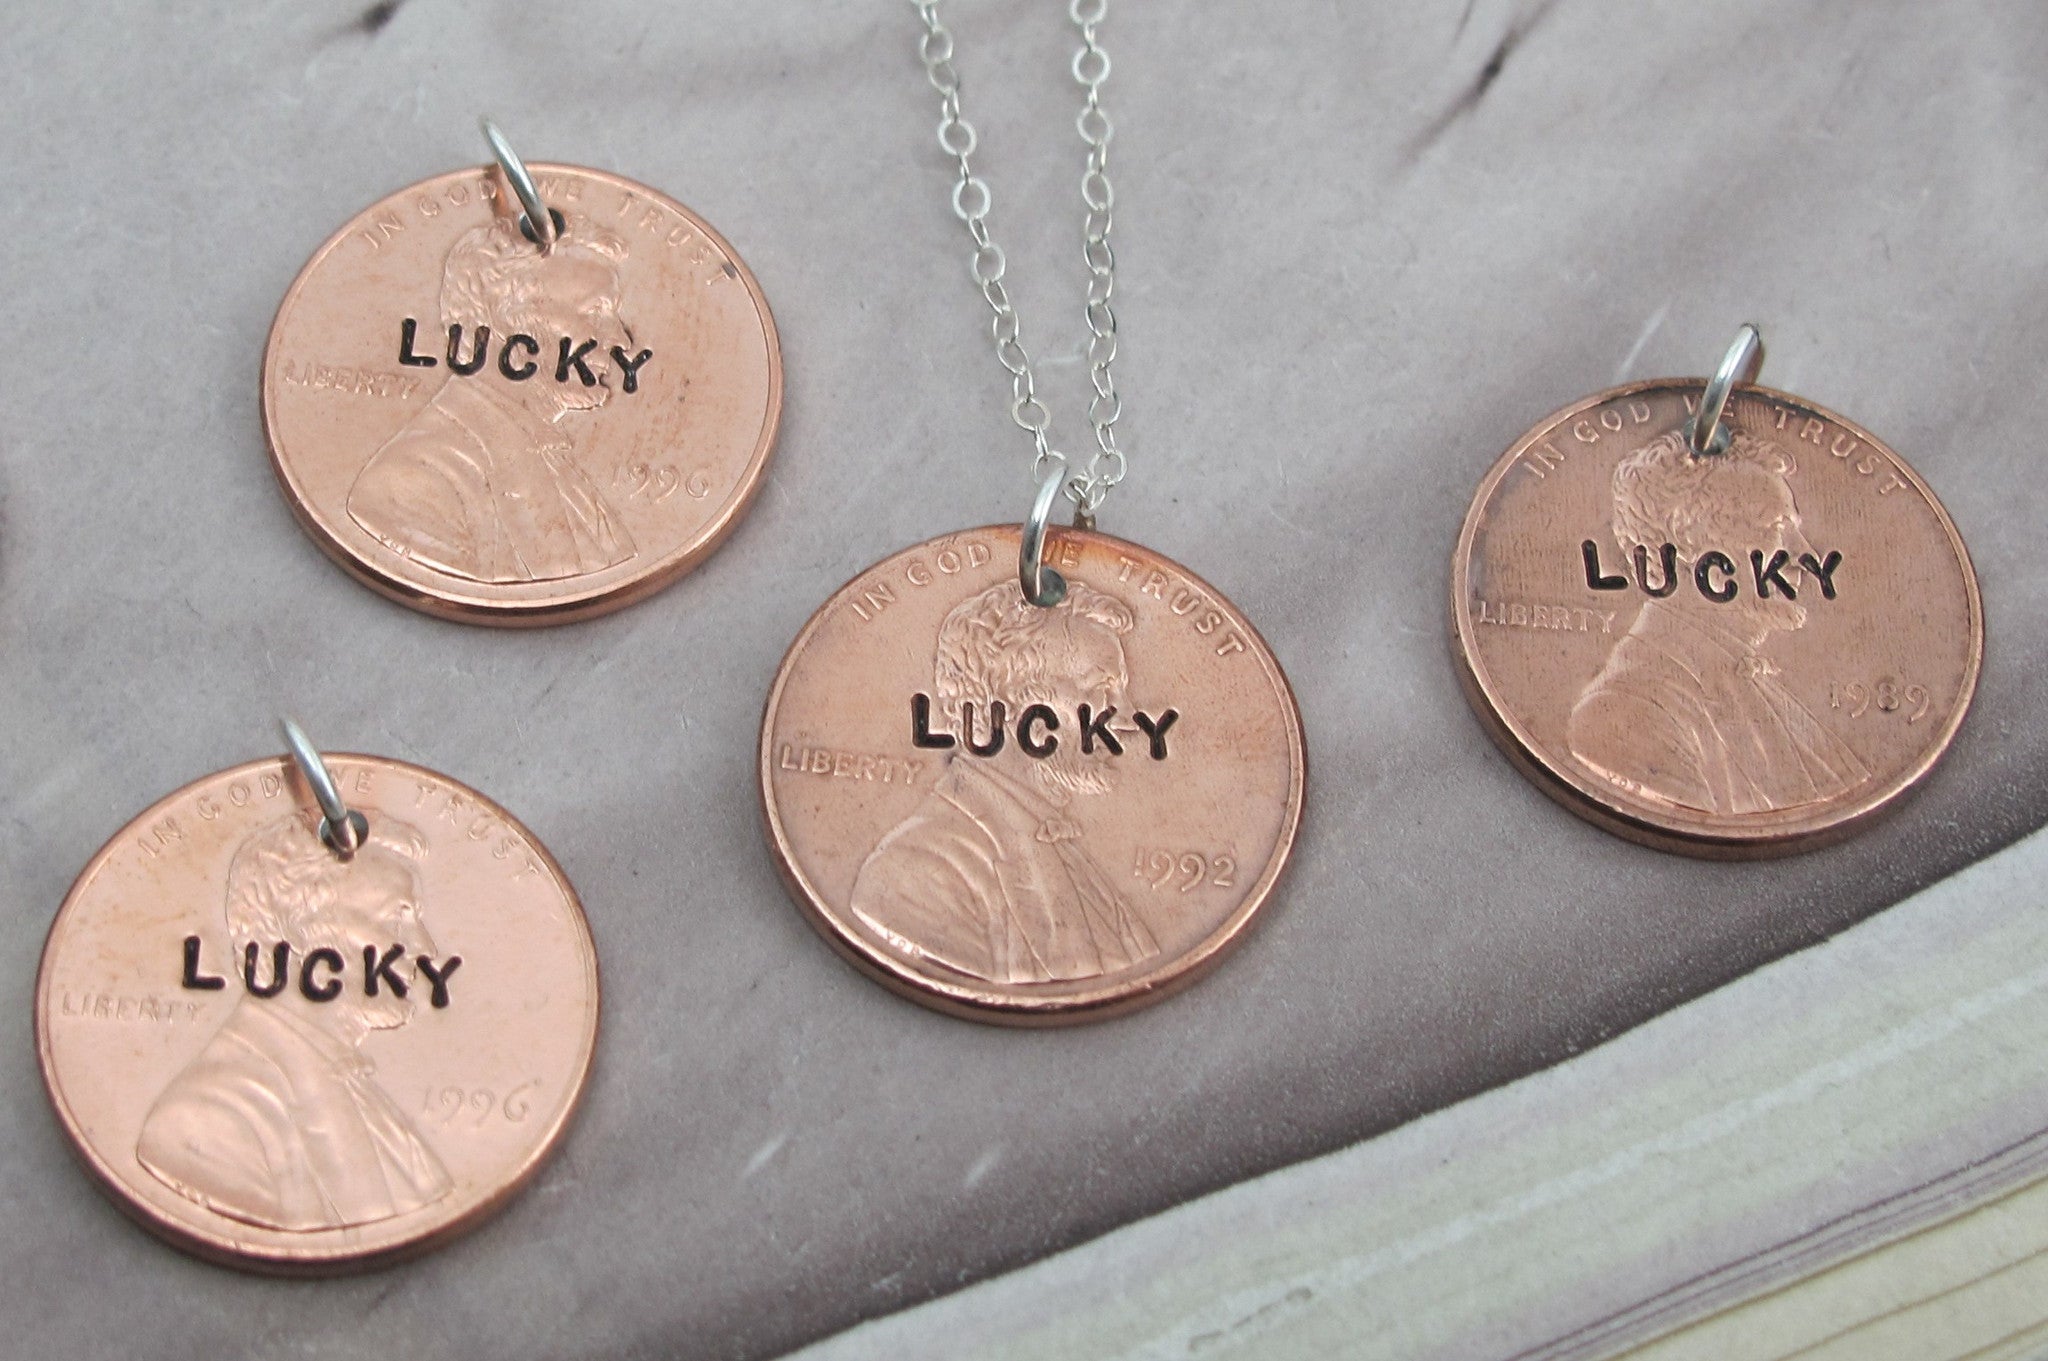 Lucky Stamped Pennies!